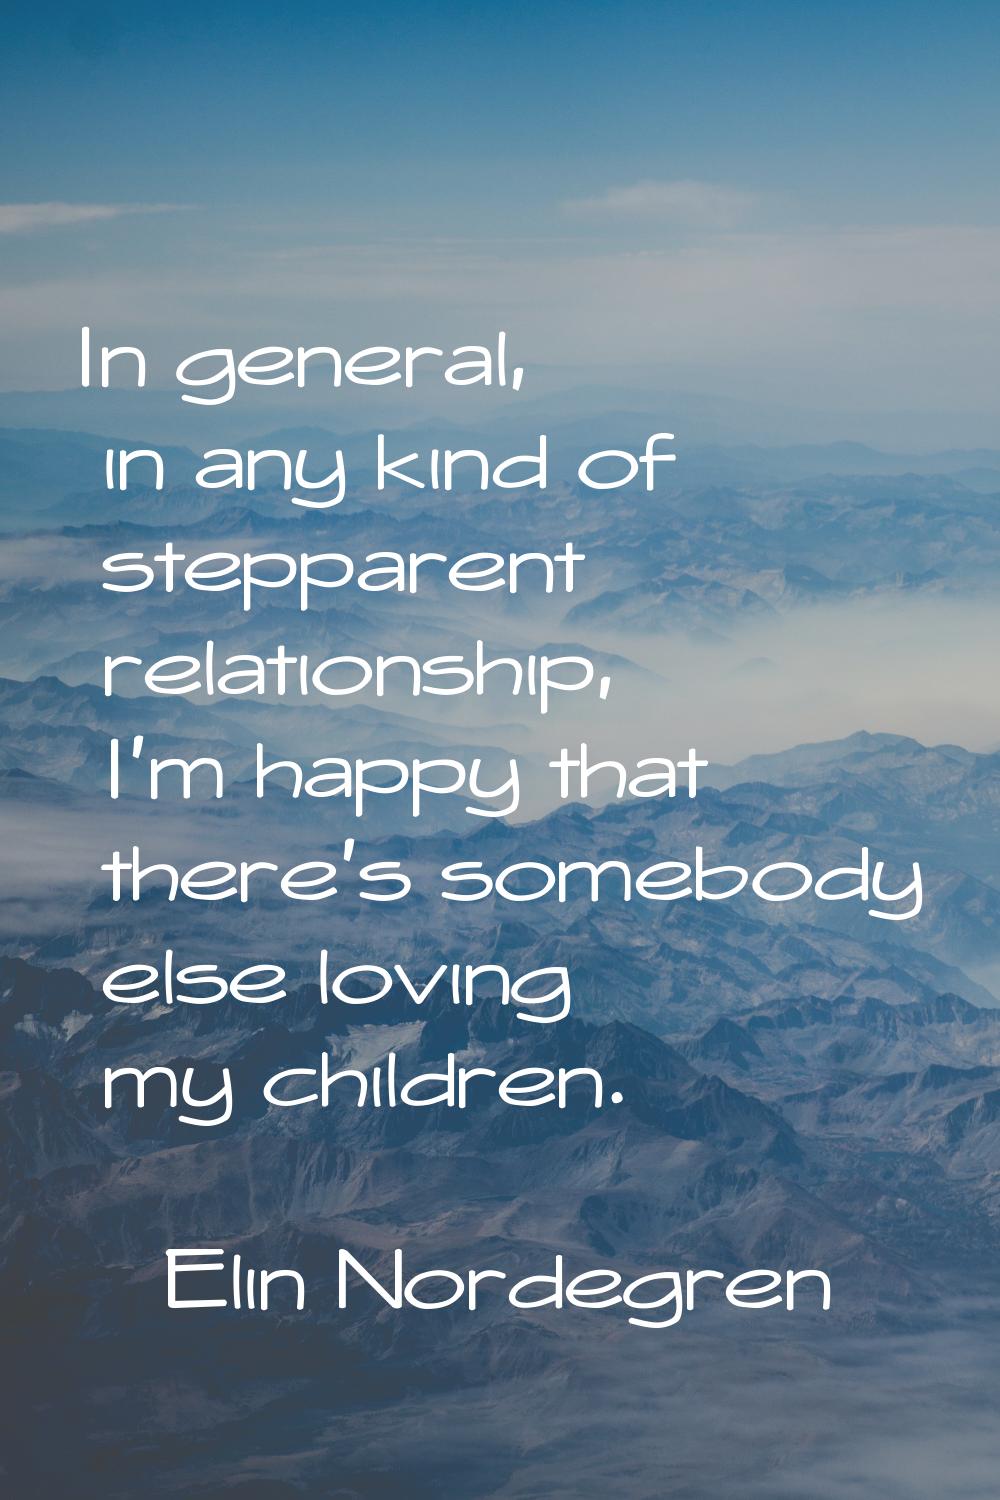 In general, in any kind of stepparent relationship, I'm happy that there's somebody else loving my 